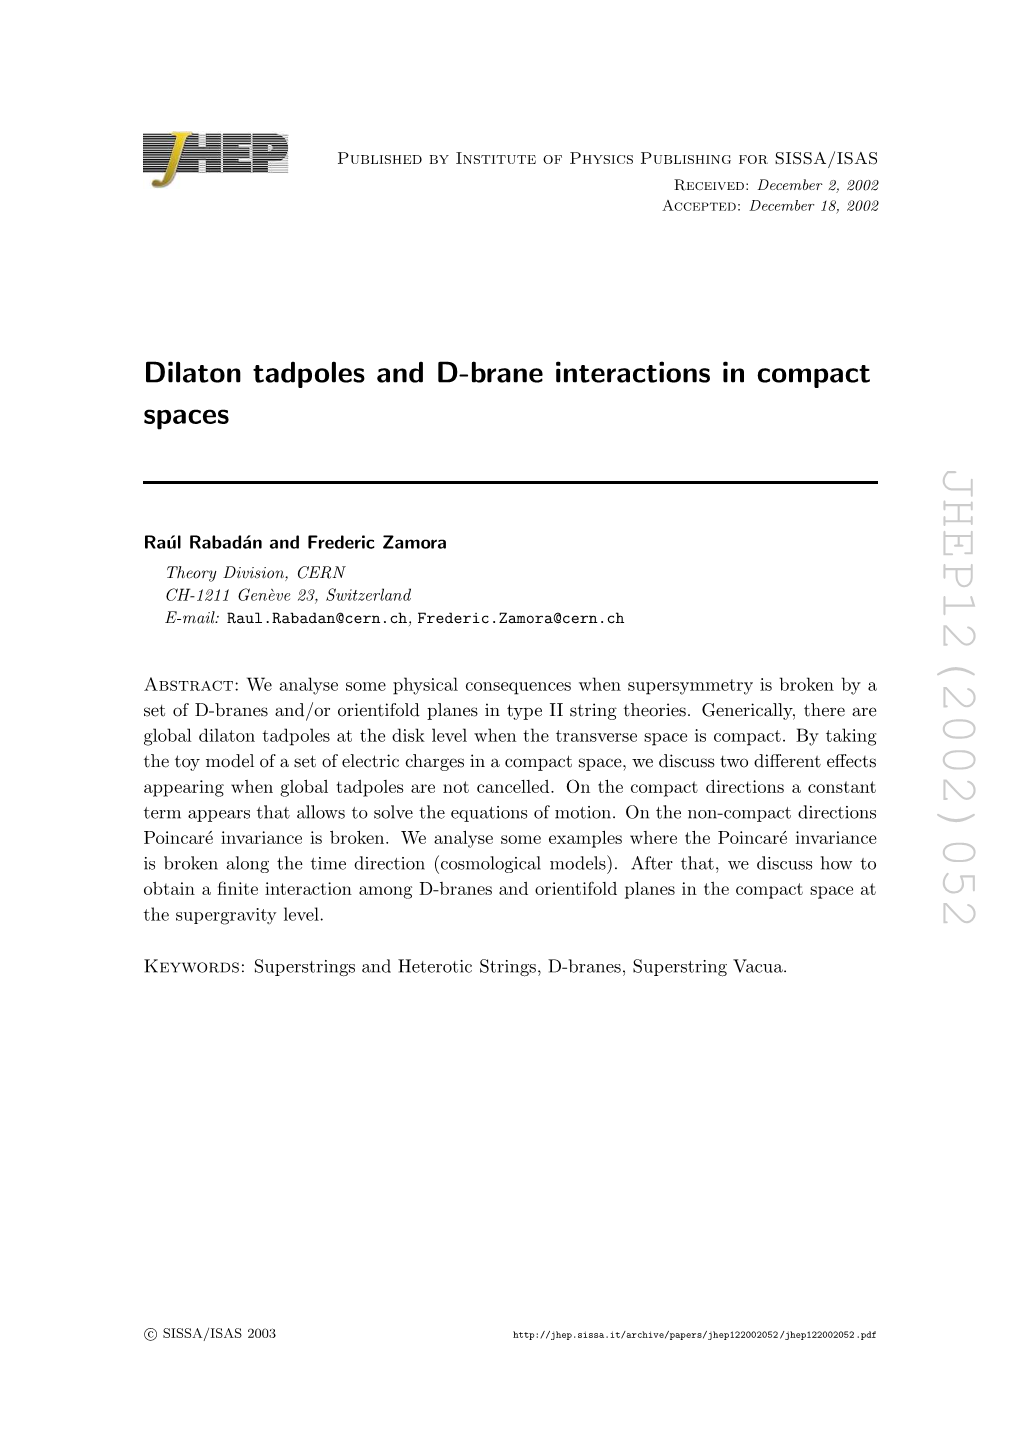 Dilaton Tadpoles and D-Brane Interactions in Compact Spaces